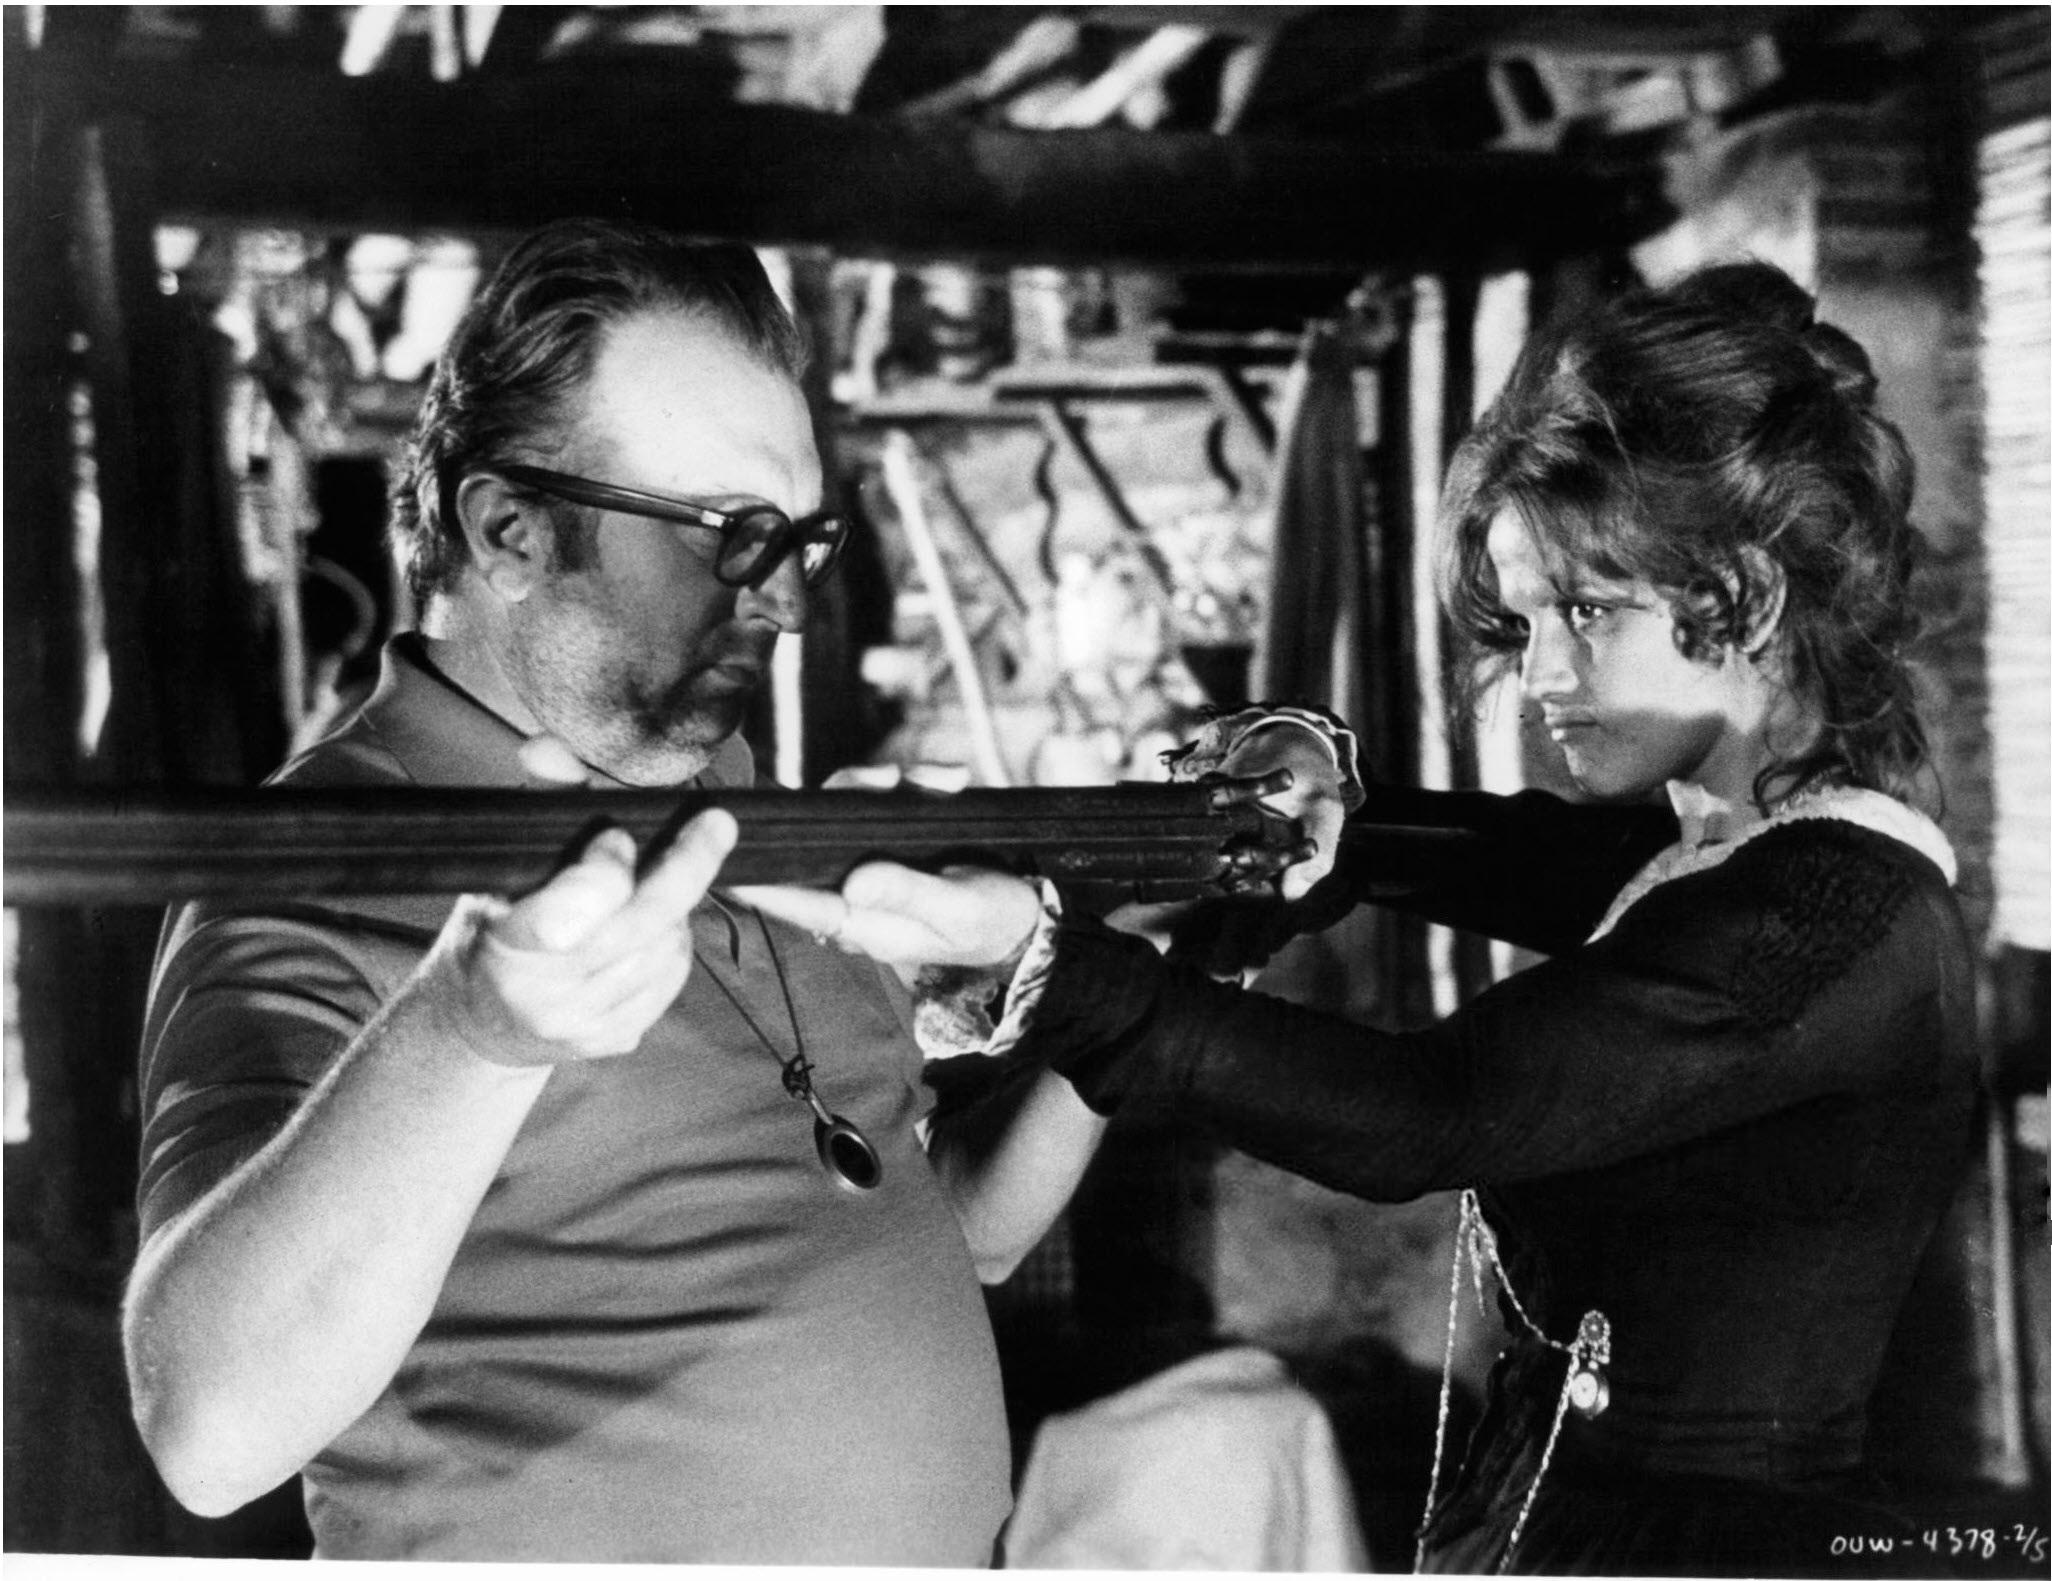 Director of 'Once Upon A Time In The West' Sergio Leone, showing Claudia Cardinale how to aim her rifle, 1968.jpg